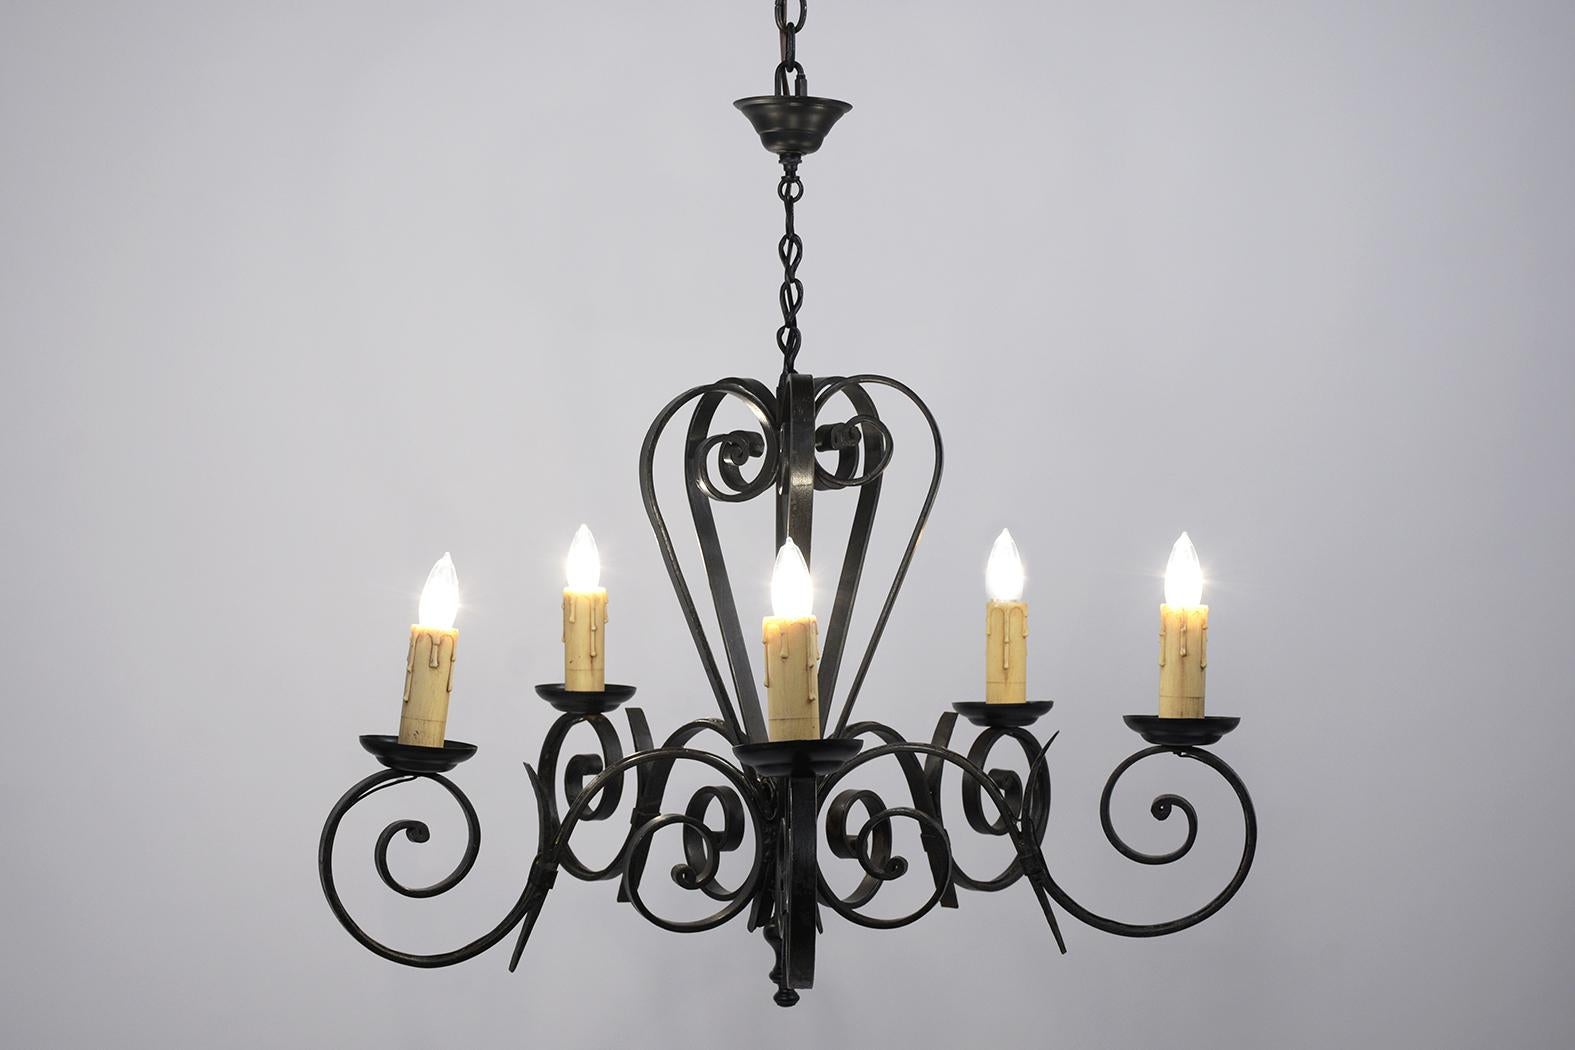 This French chandelier has been restored and is made out of iron. The chandelier features handcrafted scroll arms design, six lights painted in black color, newly waxed, and polished with a beautiful patina finish. This chandelier is wired to US